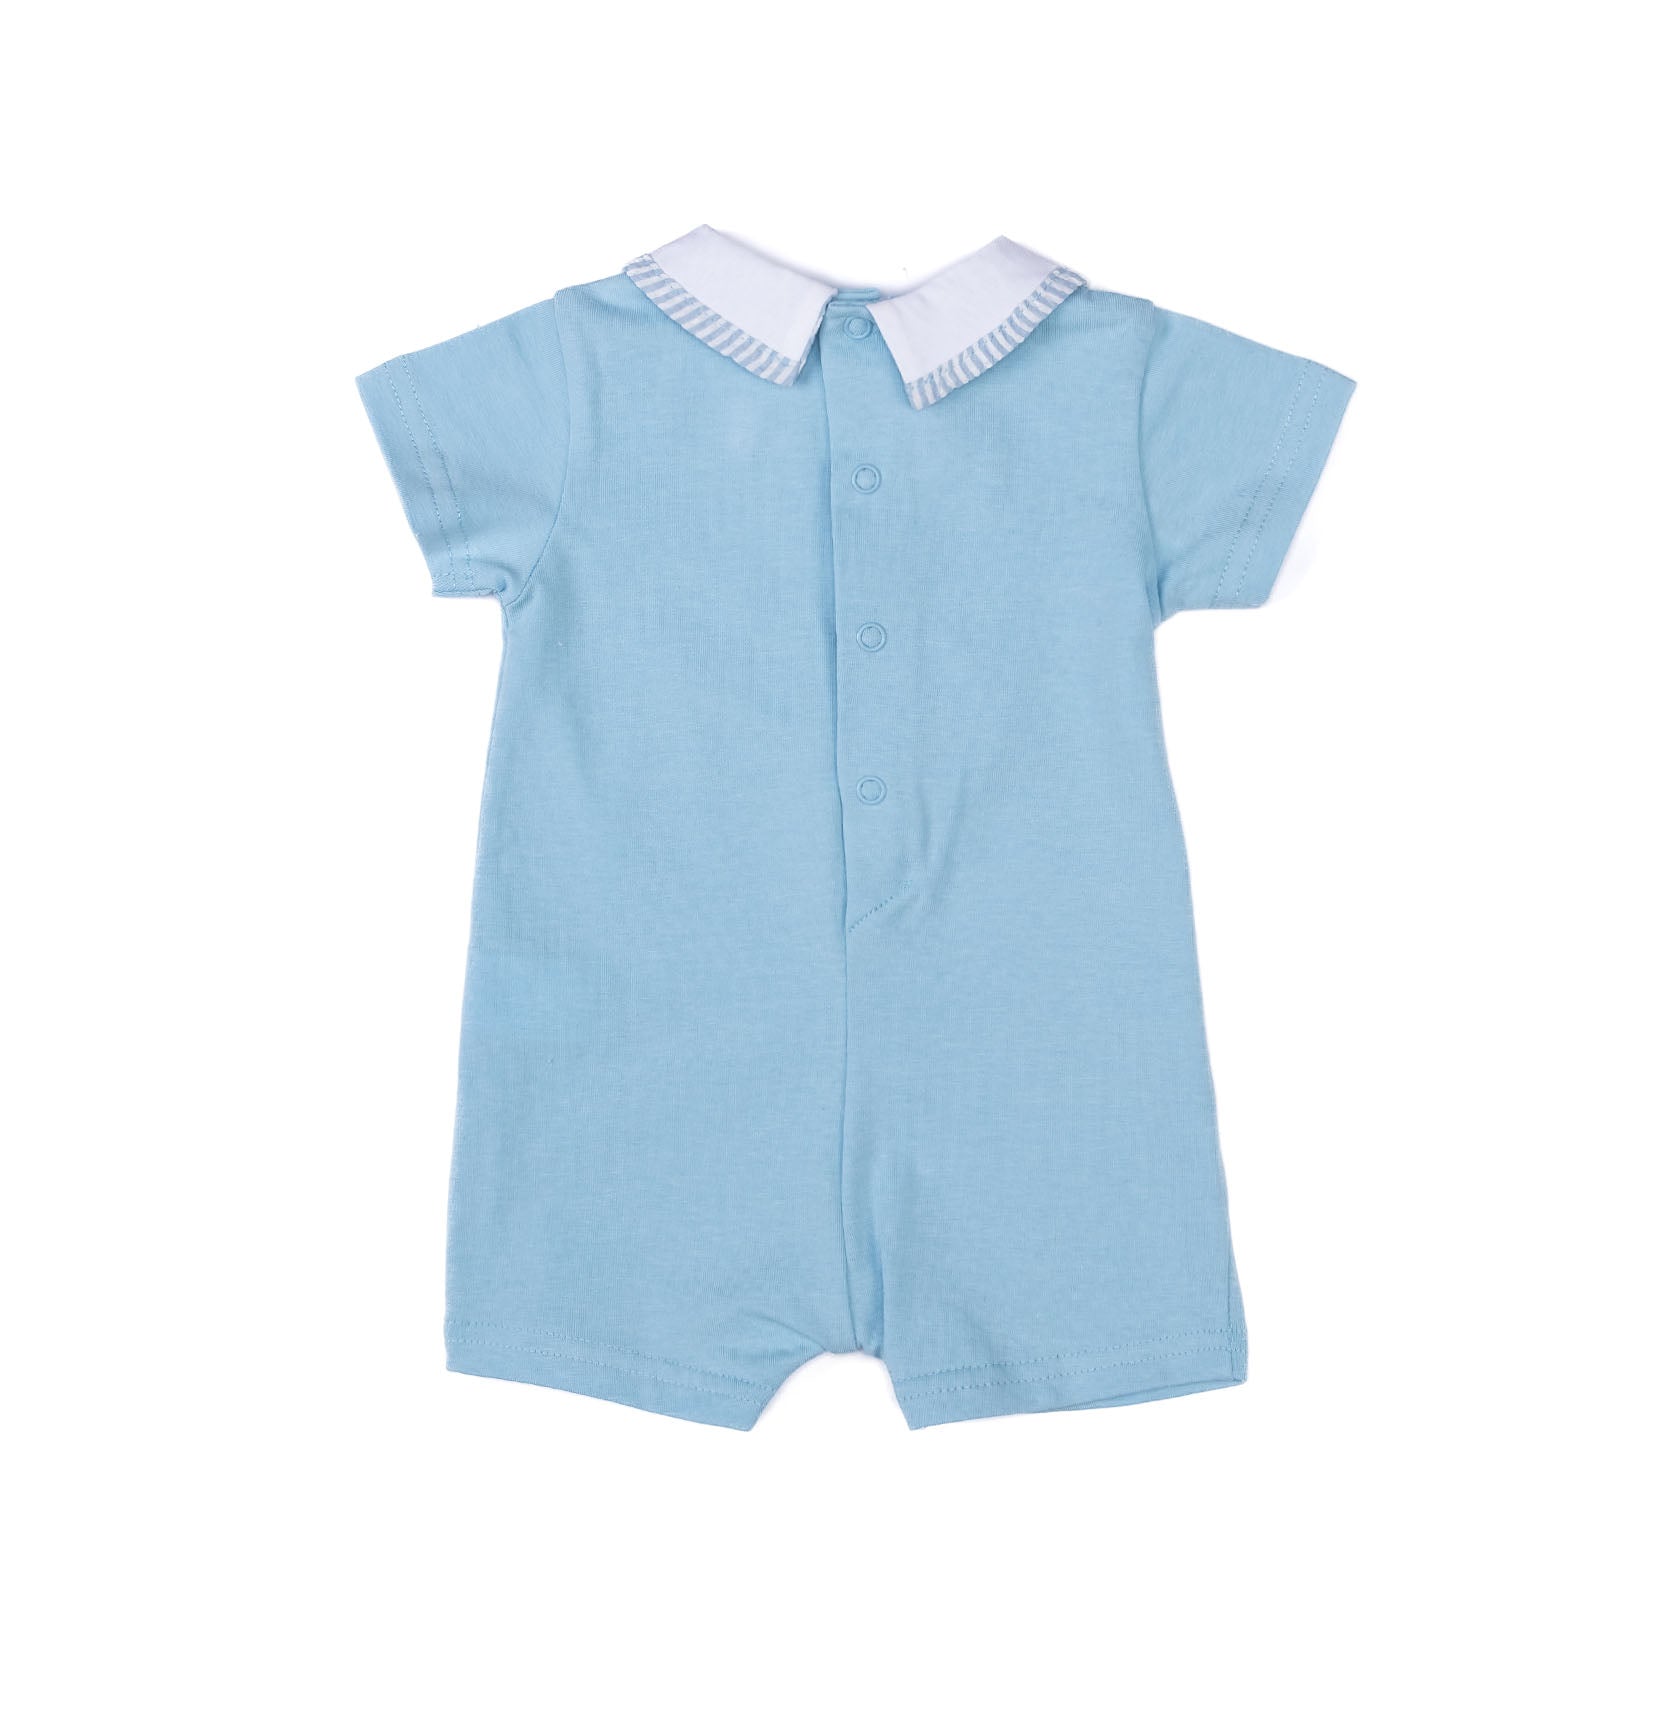 Airplane baby boy romper by Pompelo